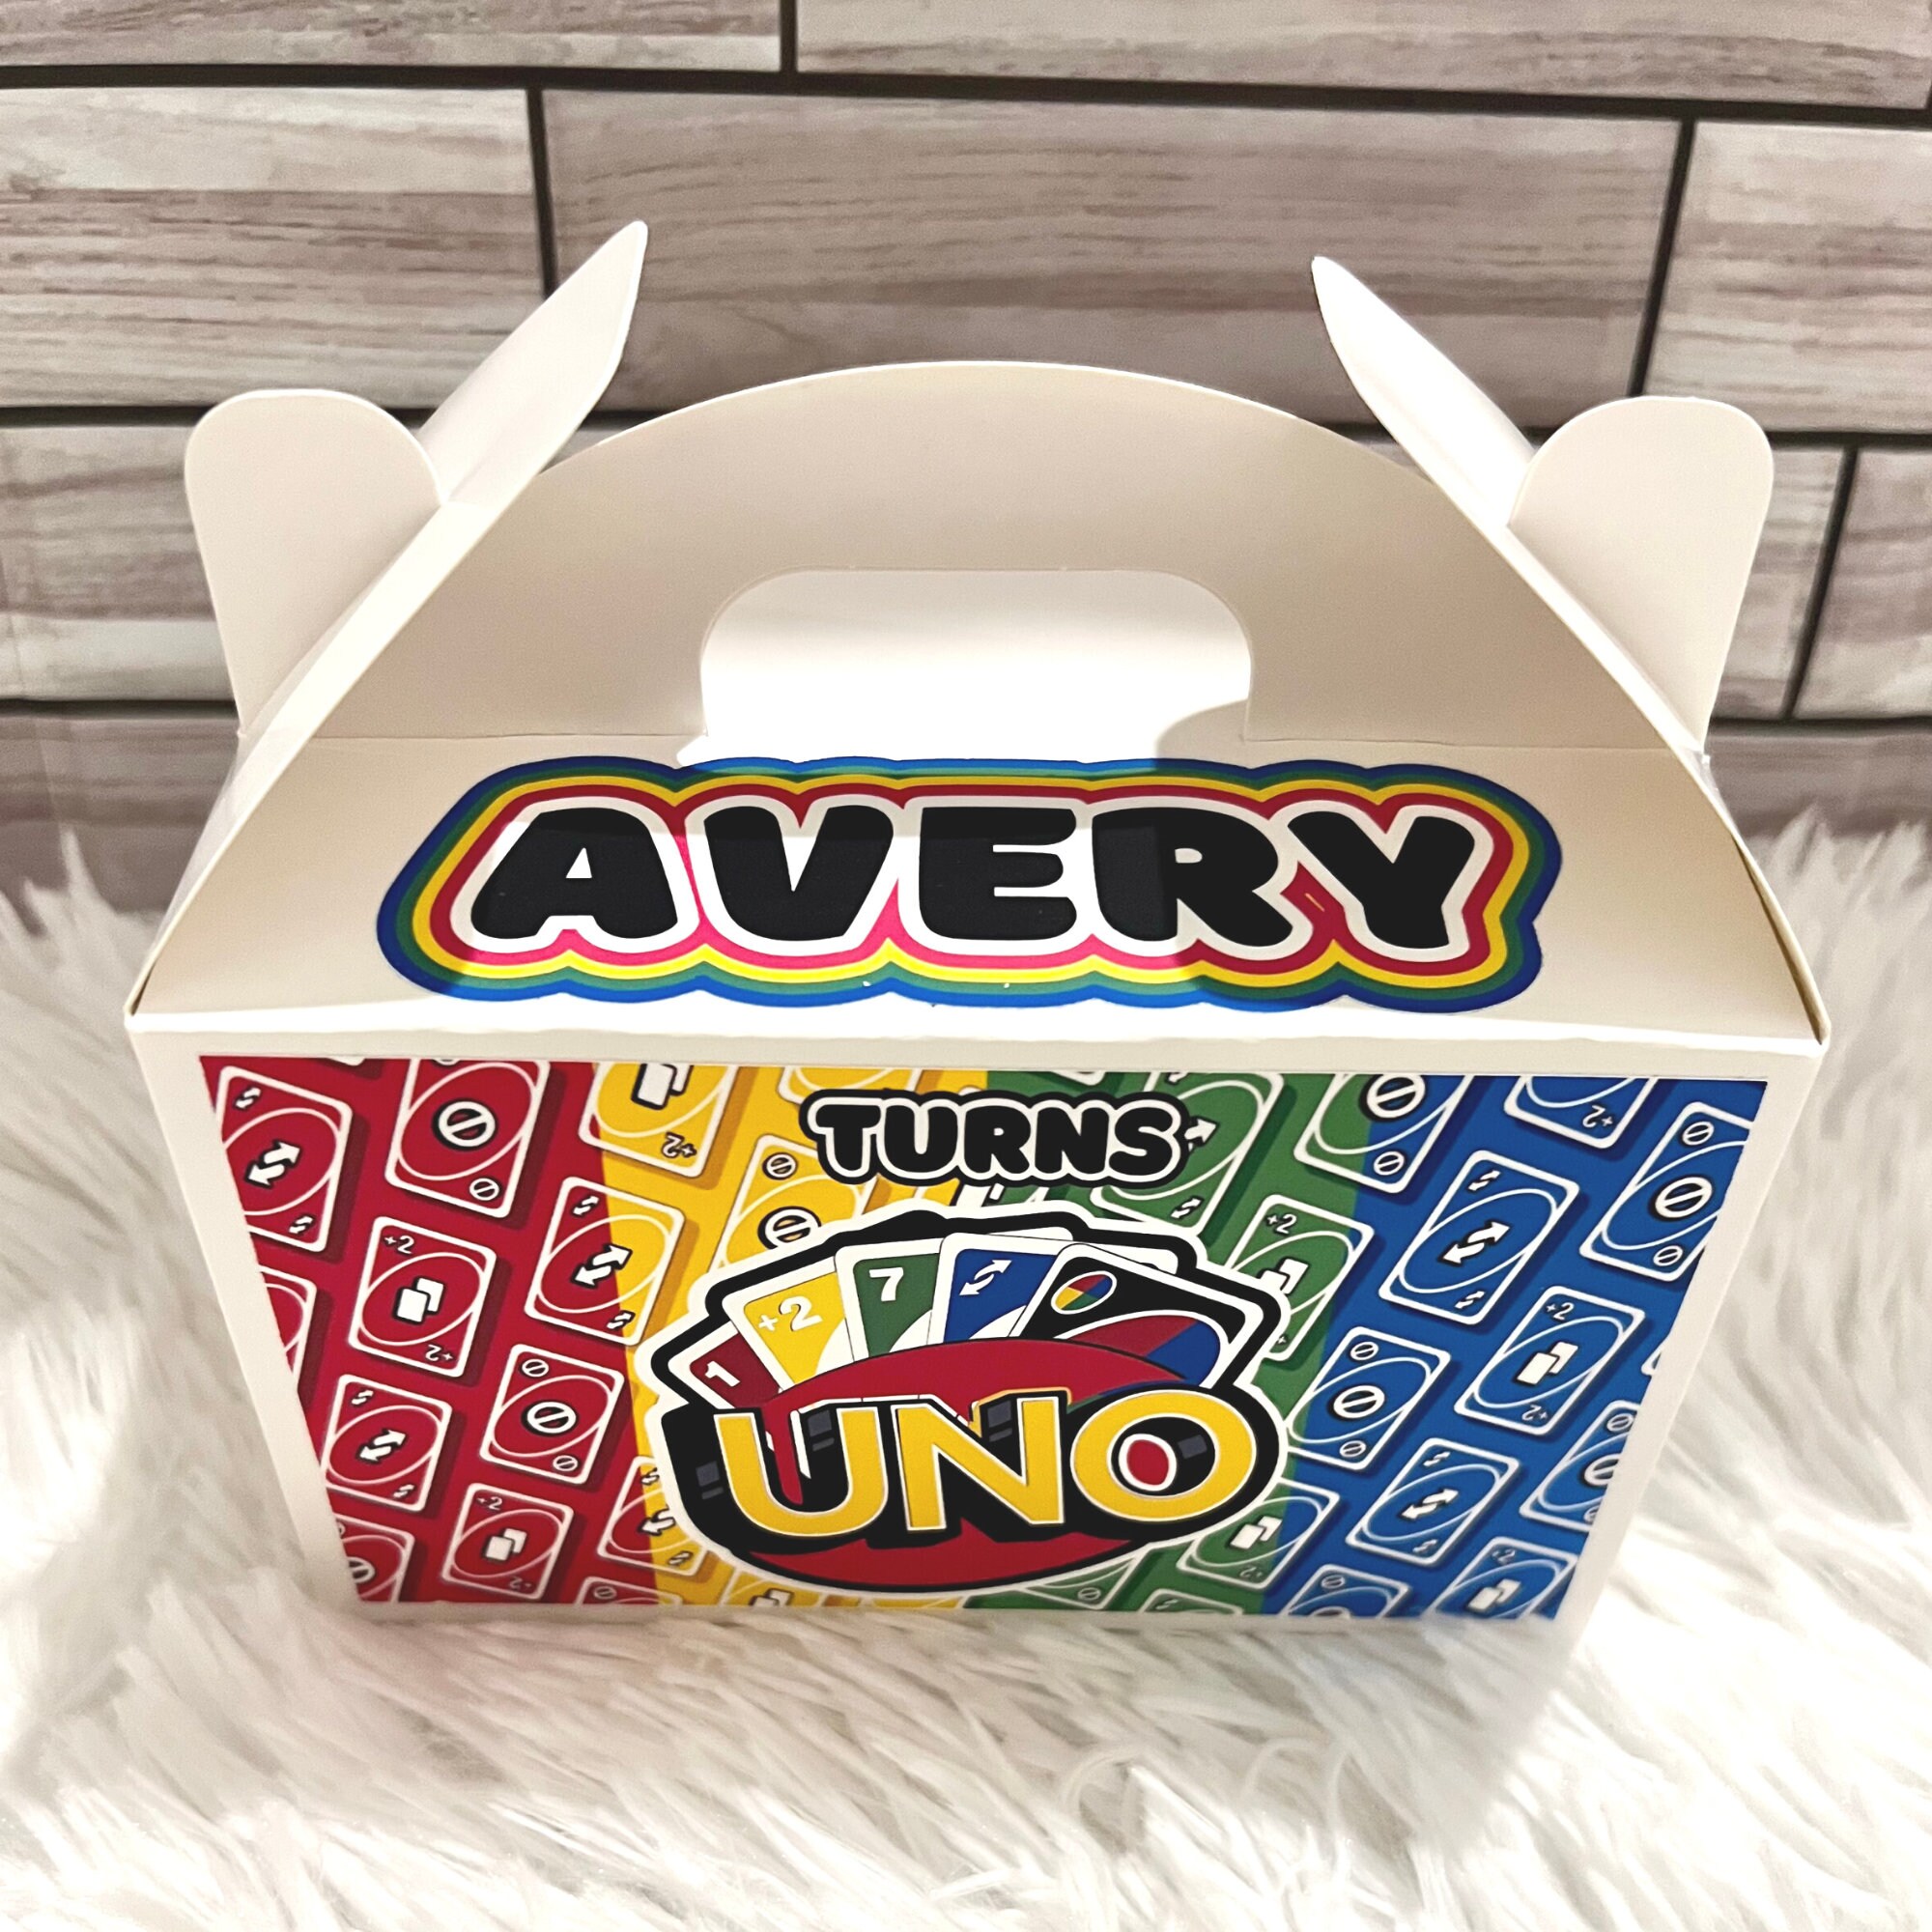 Uno themed party favors made with used but cleaned and disinfected